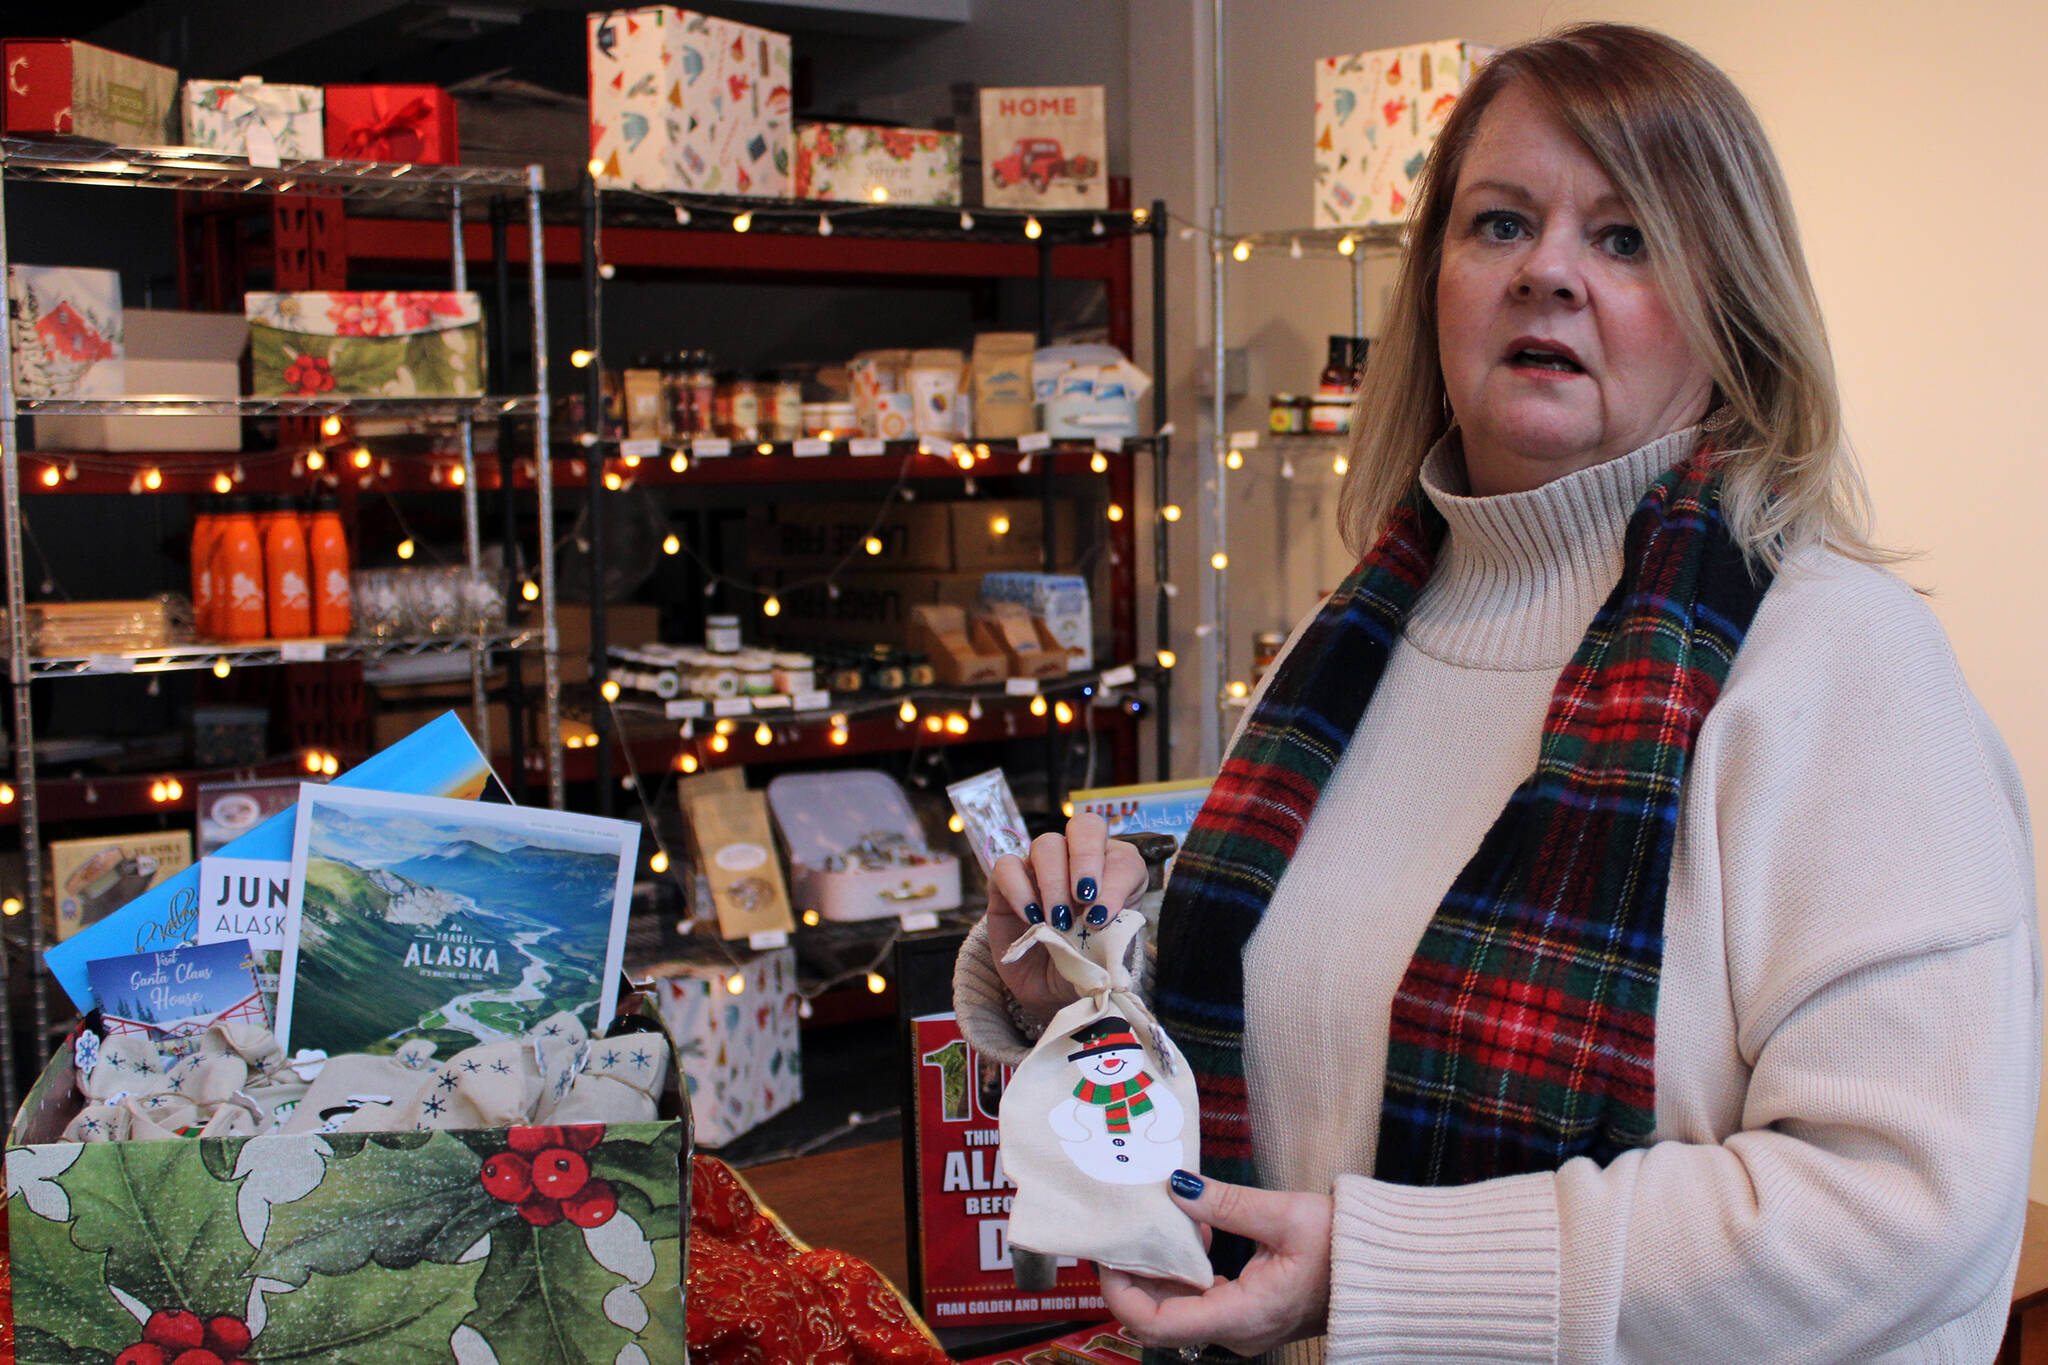 Dana Zigmund / Juneau Empire 
Midgi Moore, Juneau Food Tours’ CEO, shows off a Santa Bell from North Pole, Alaska, on Tuesday at the Juneau Food Tours store. The bell is one of the items included in a 12 Days of Alaskan Christmas holiday box she selling online this season. She said her online business is key to helping her hang on until next season.